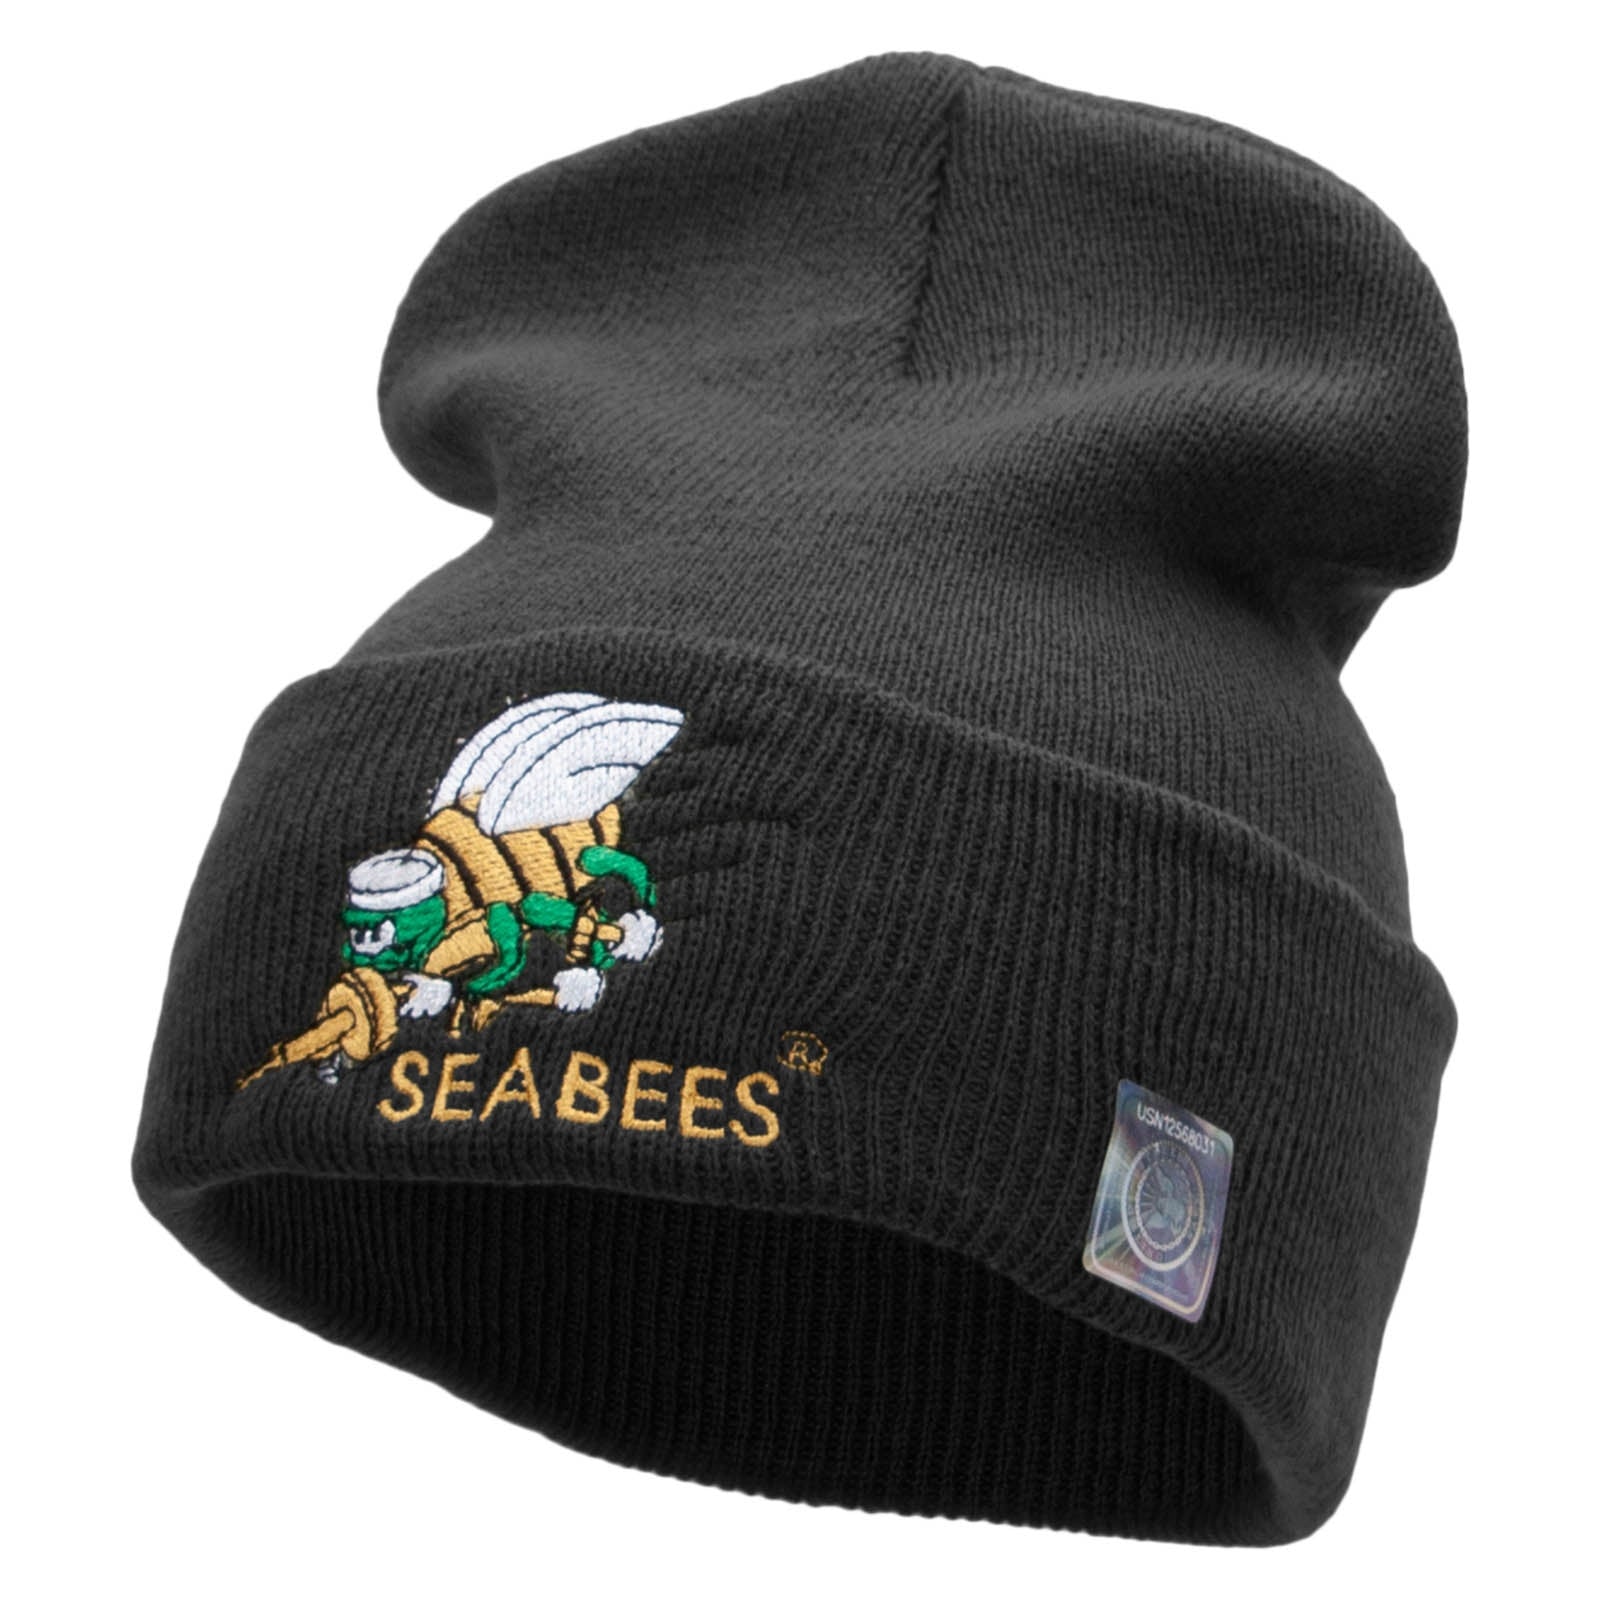 Licensed Navy Seabees Symbol Embroidered Cuff Long Beanie Made in USA - Black OSFM